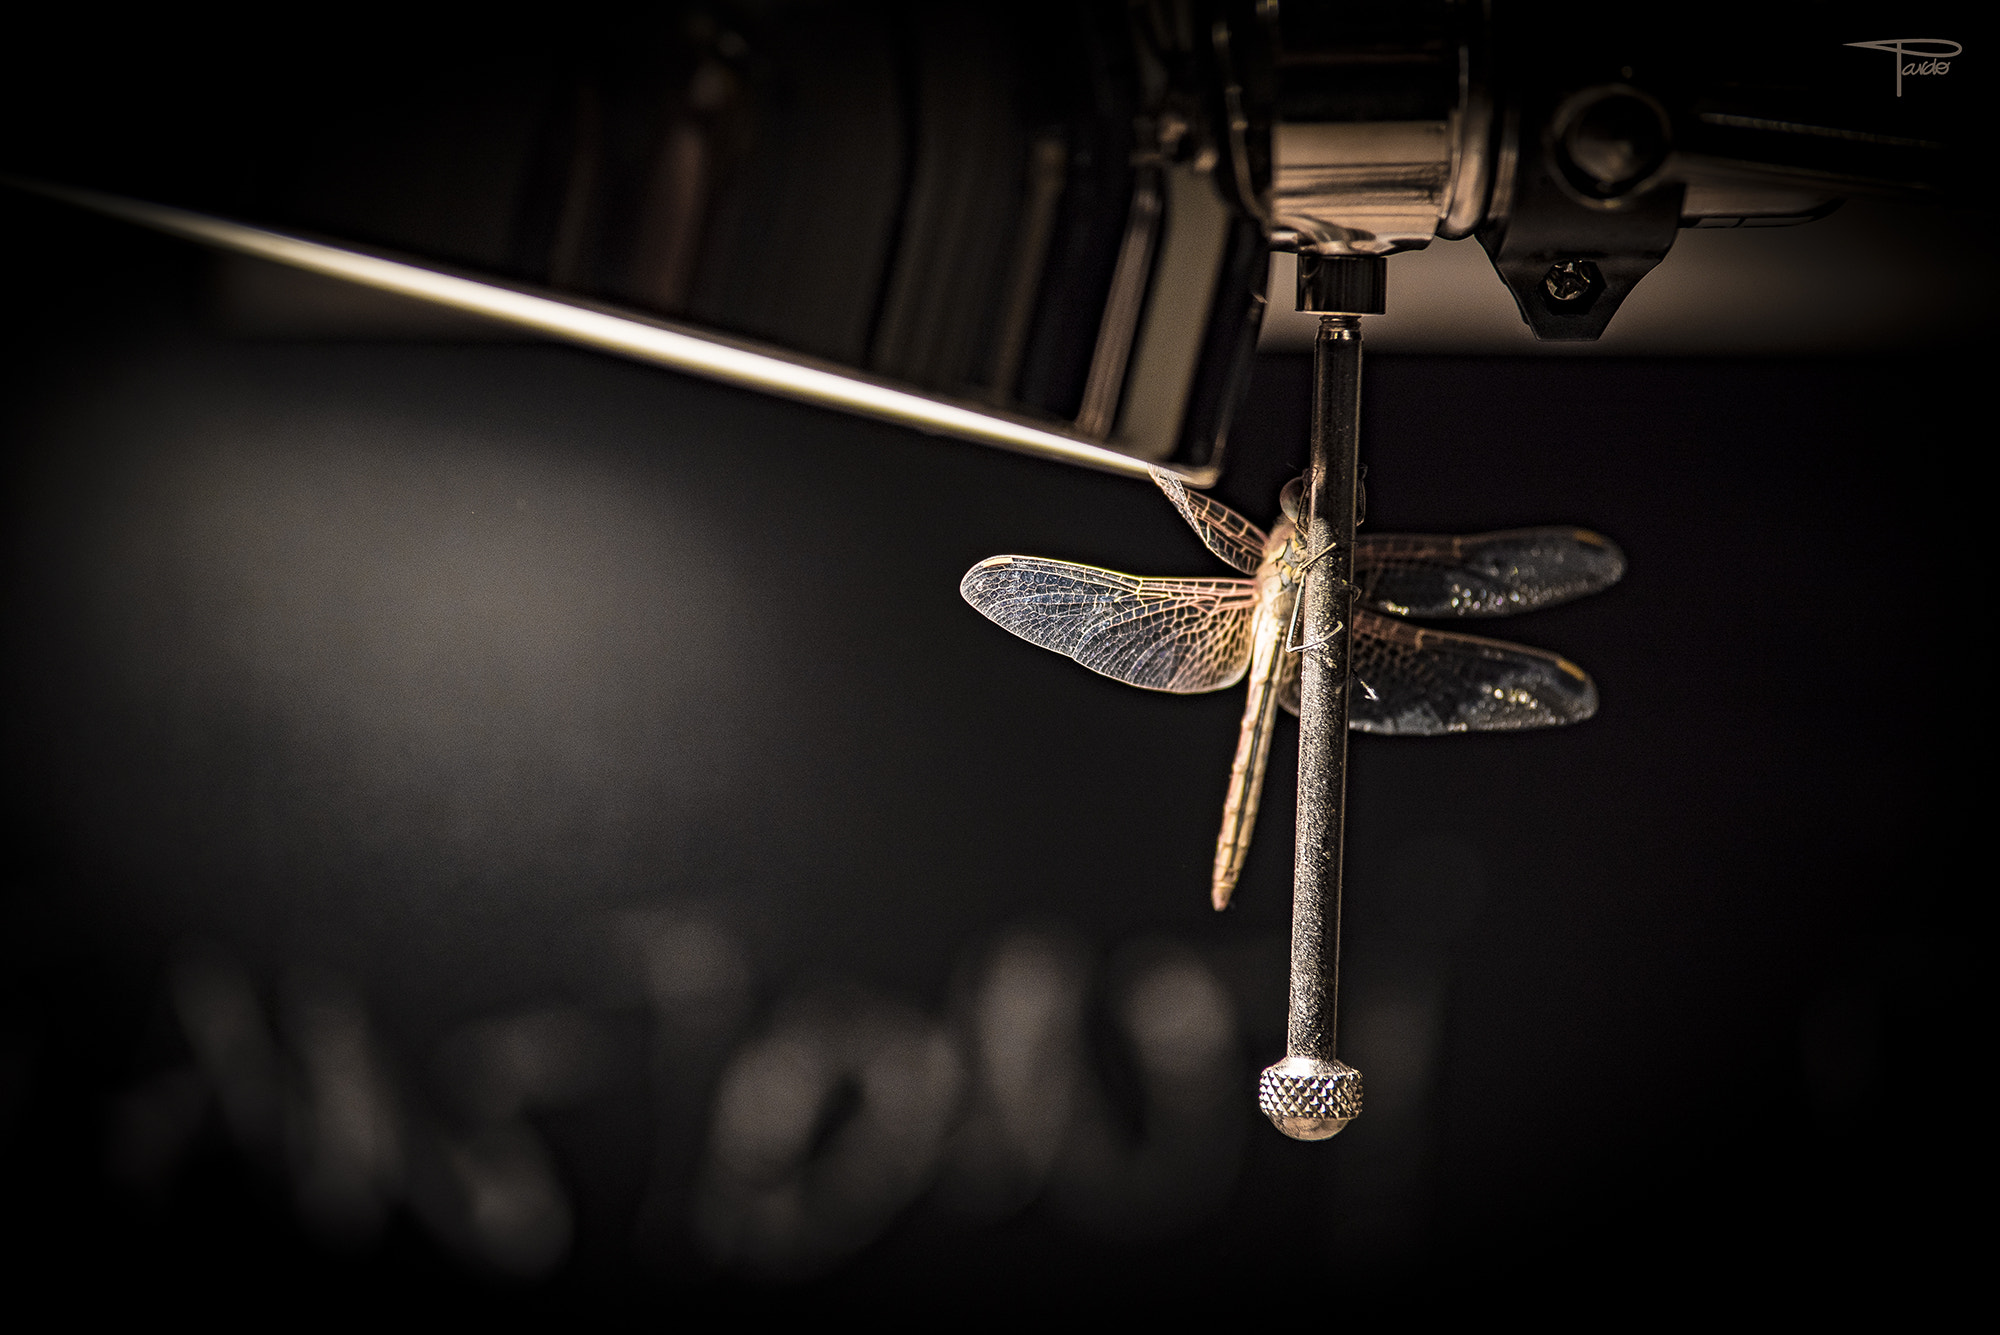 Nikon D750 sample photo. Dragonfly lost its wing photography